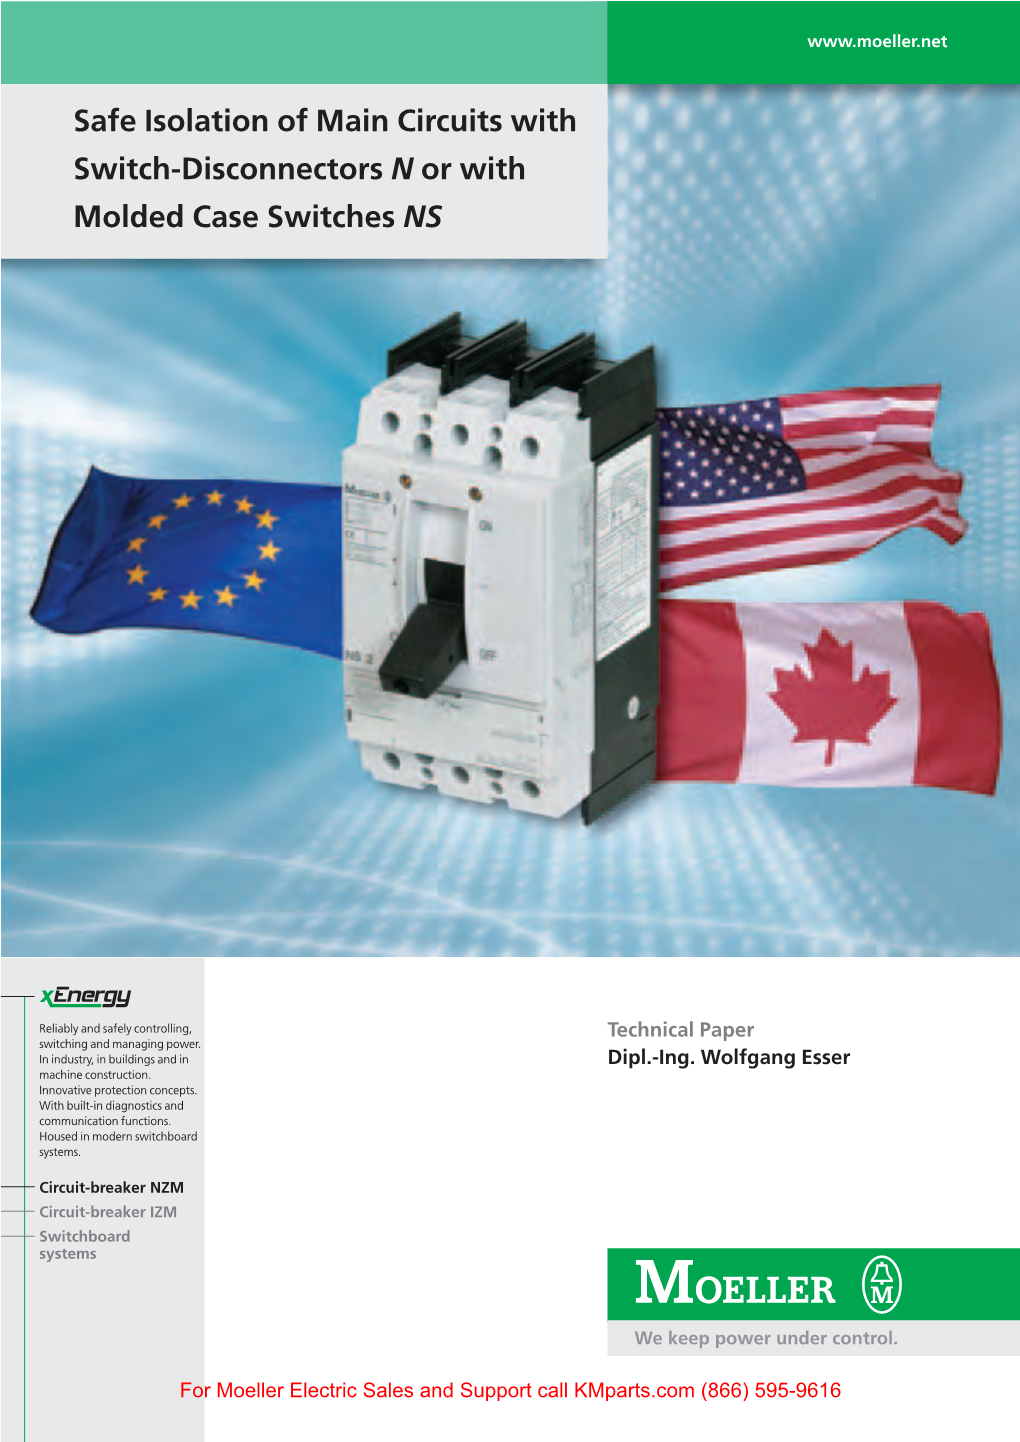 Safe Isolation of Main Circuits with Switch-Disconnectors N Or with Molded Case Switches NS